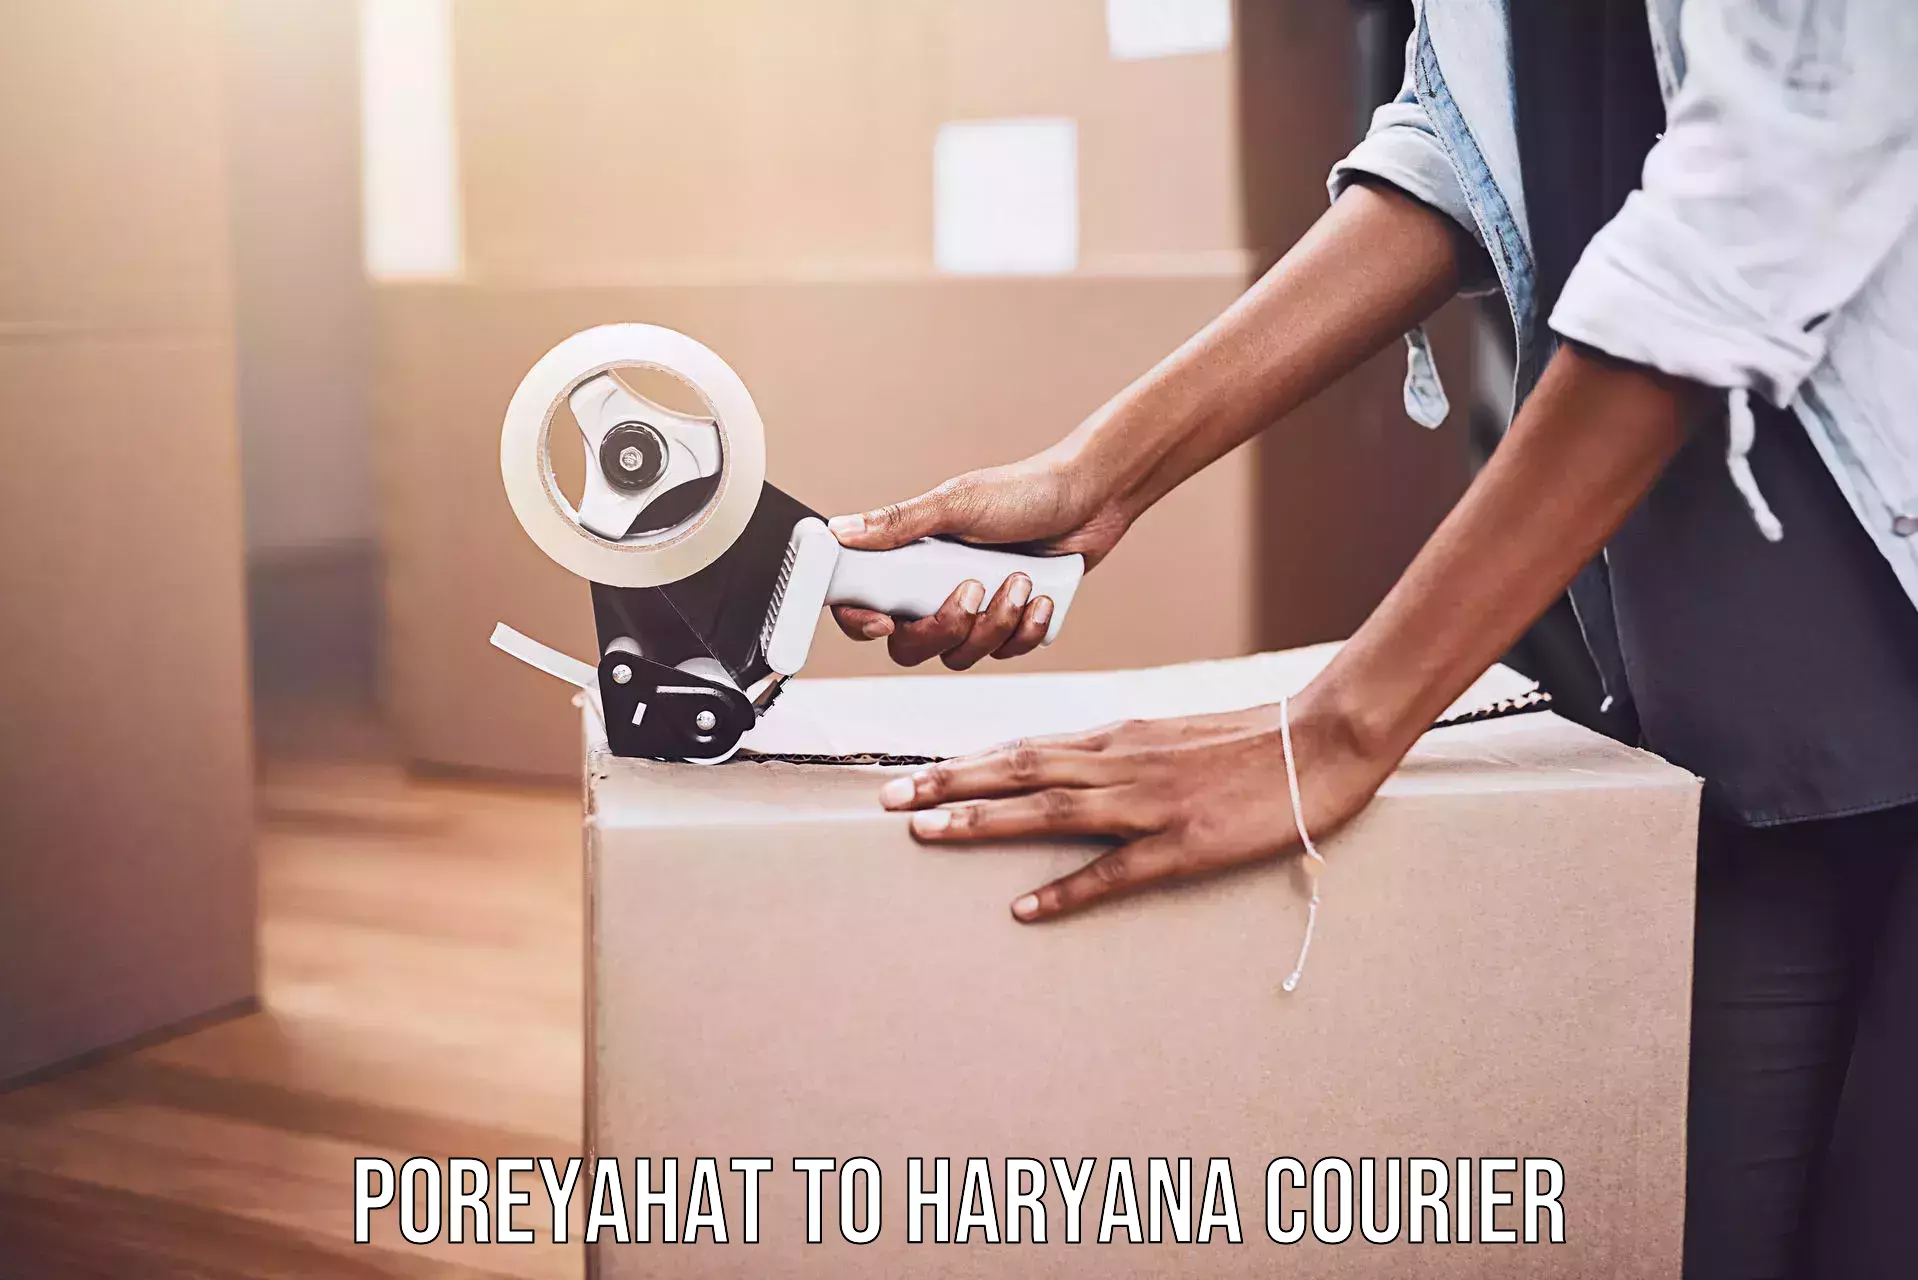 Courier service comparison Poreyahat to Odhan